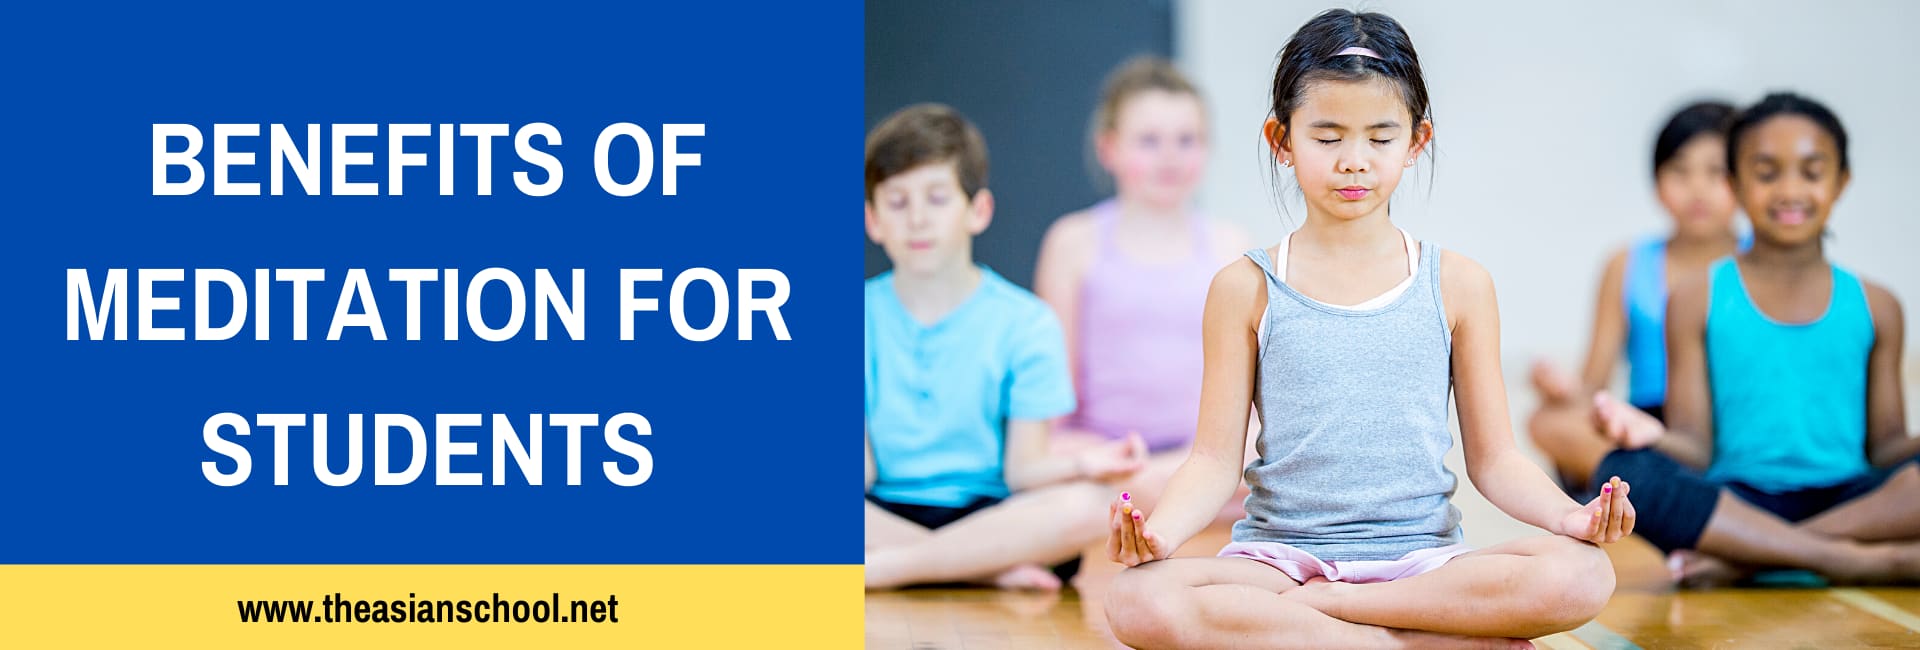 What are the benefits of mindfulness & meditation for children?